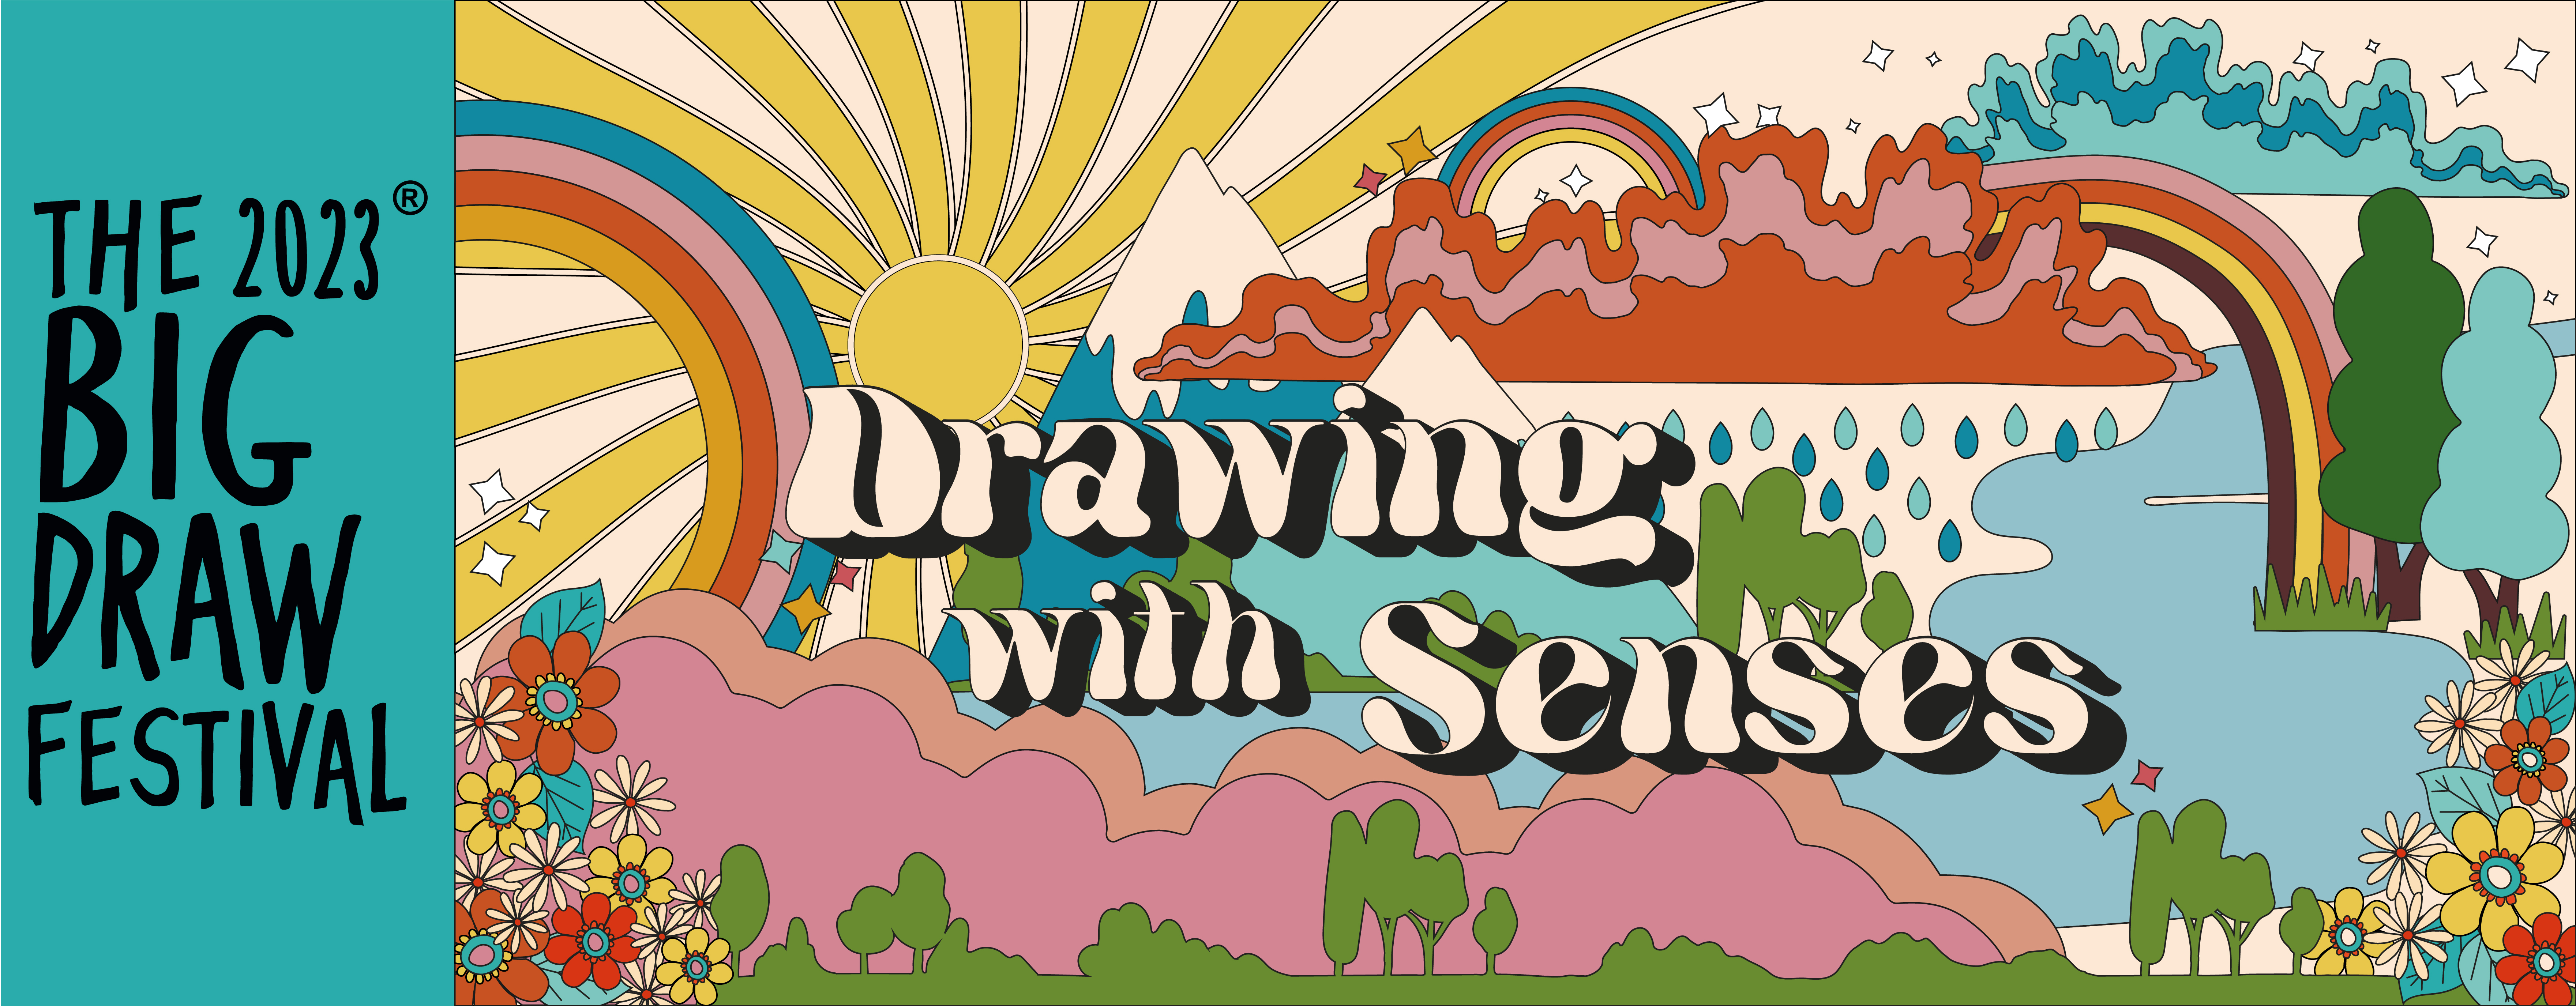 The Big Draw: Drawing with the Senses